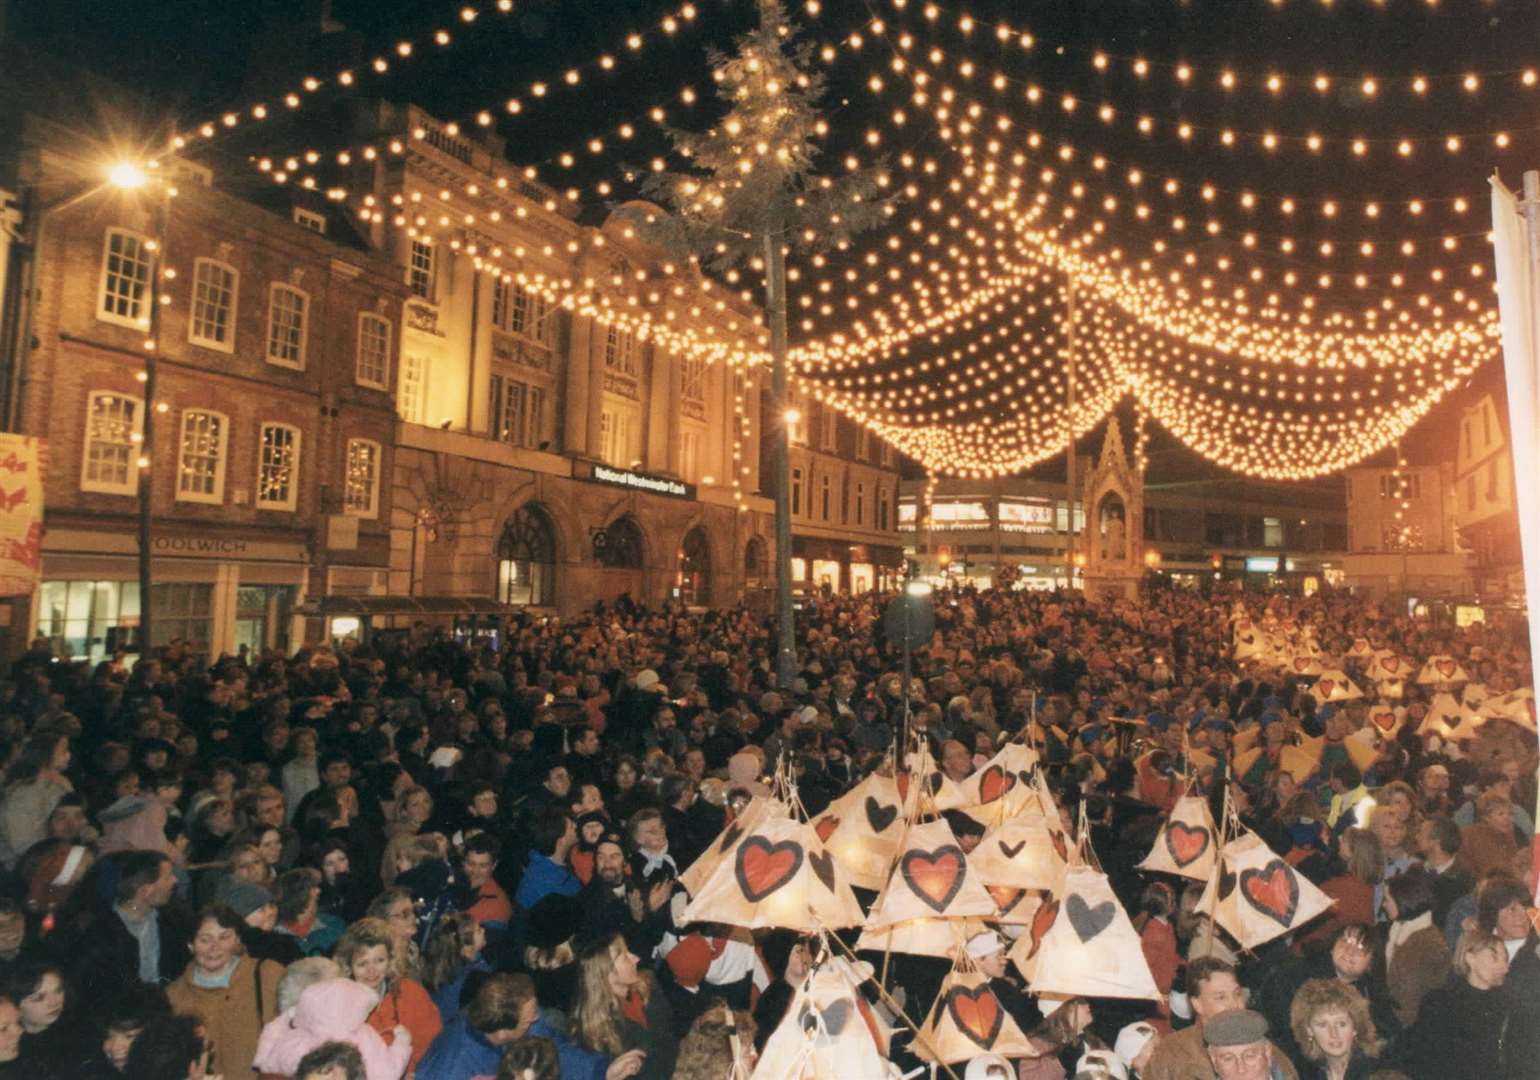 Thousands throng the town centre for a previous Christmas lights event